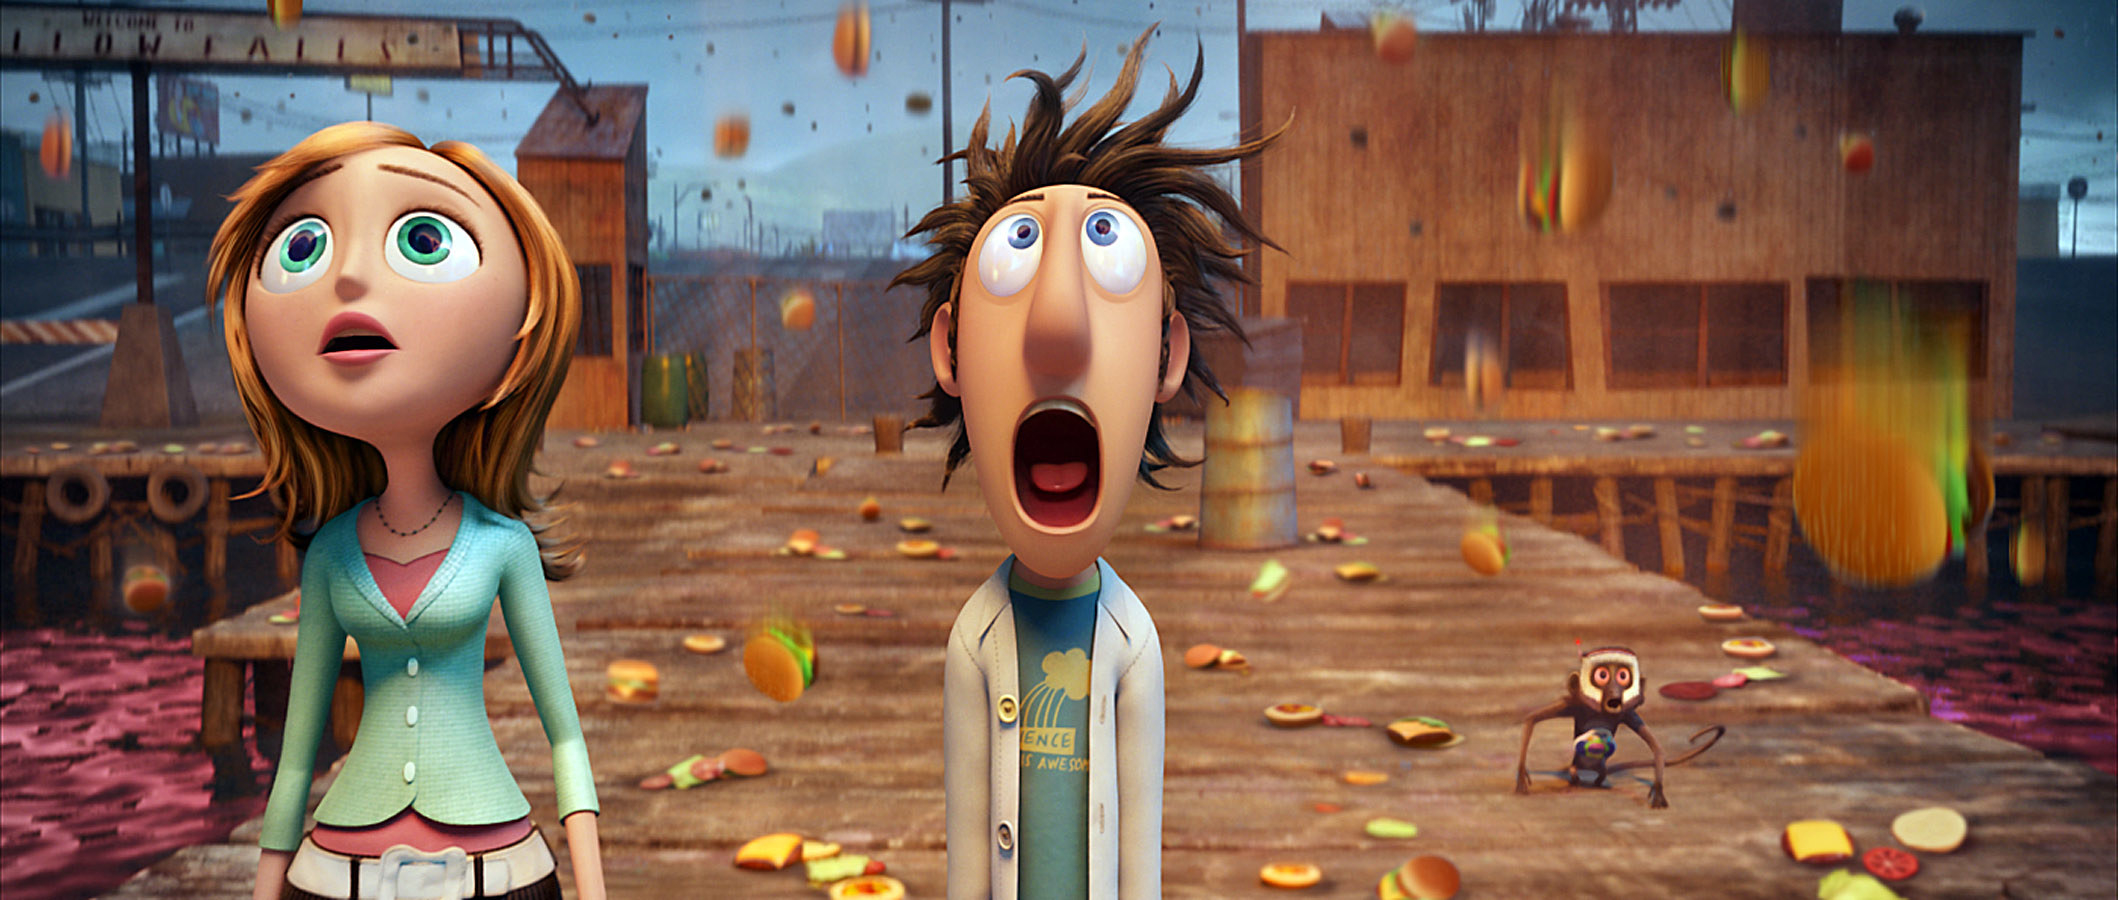 Screenshot from &quot;Cloudy with a Chance of Meatballs&quot;